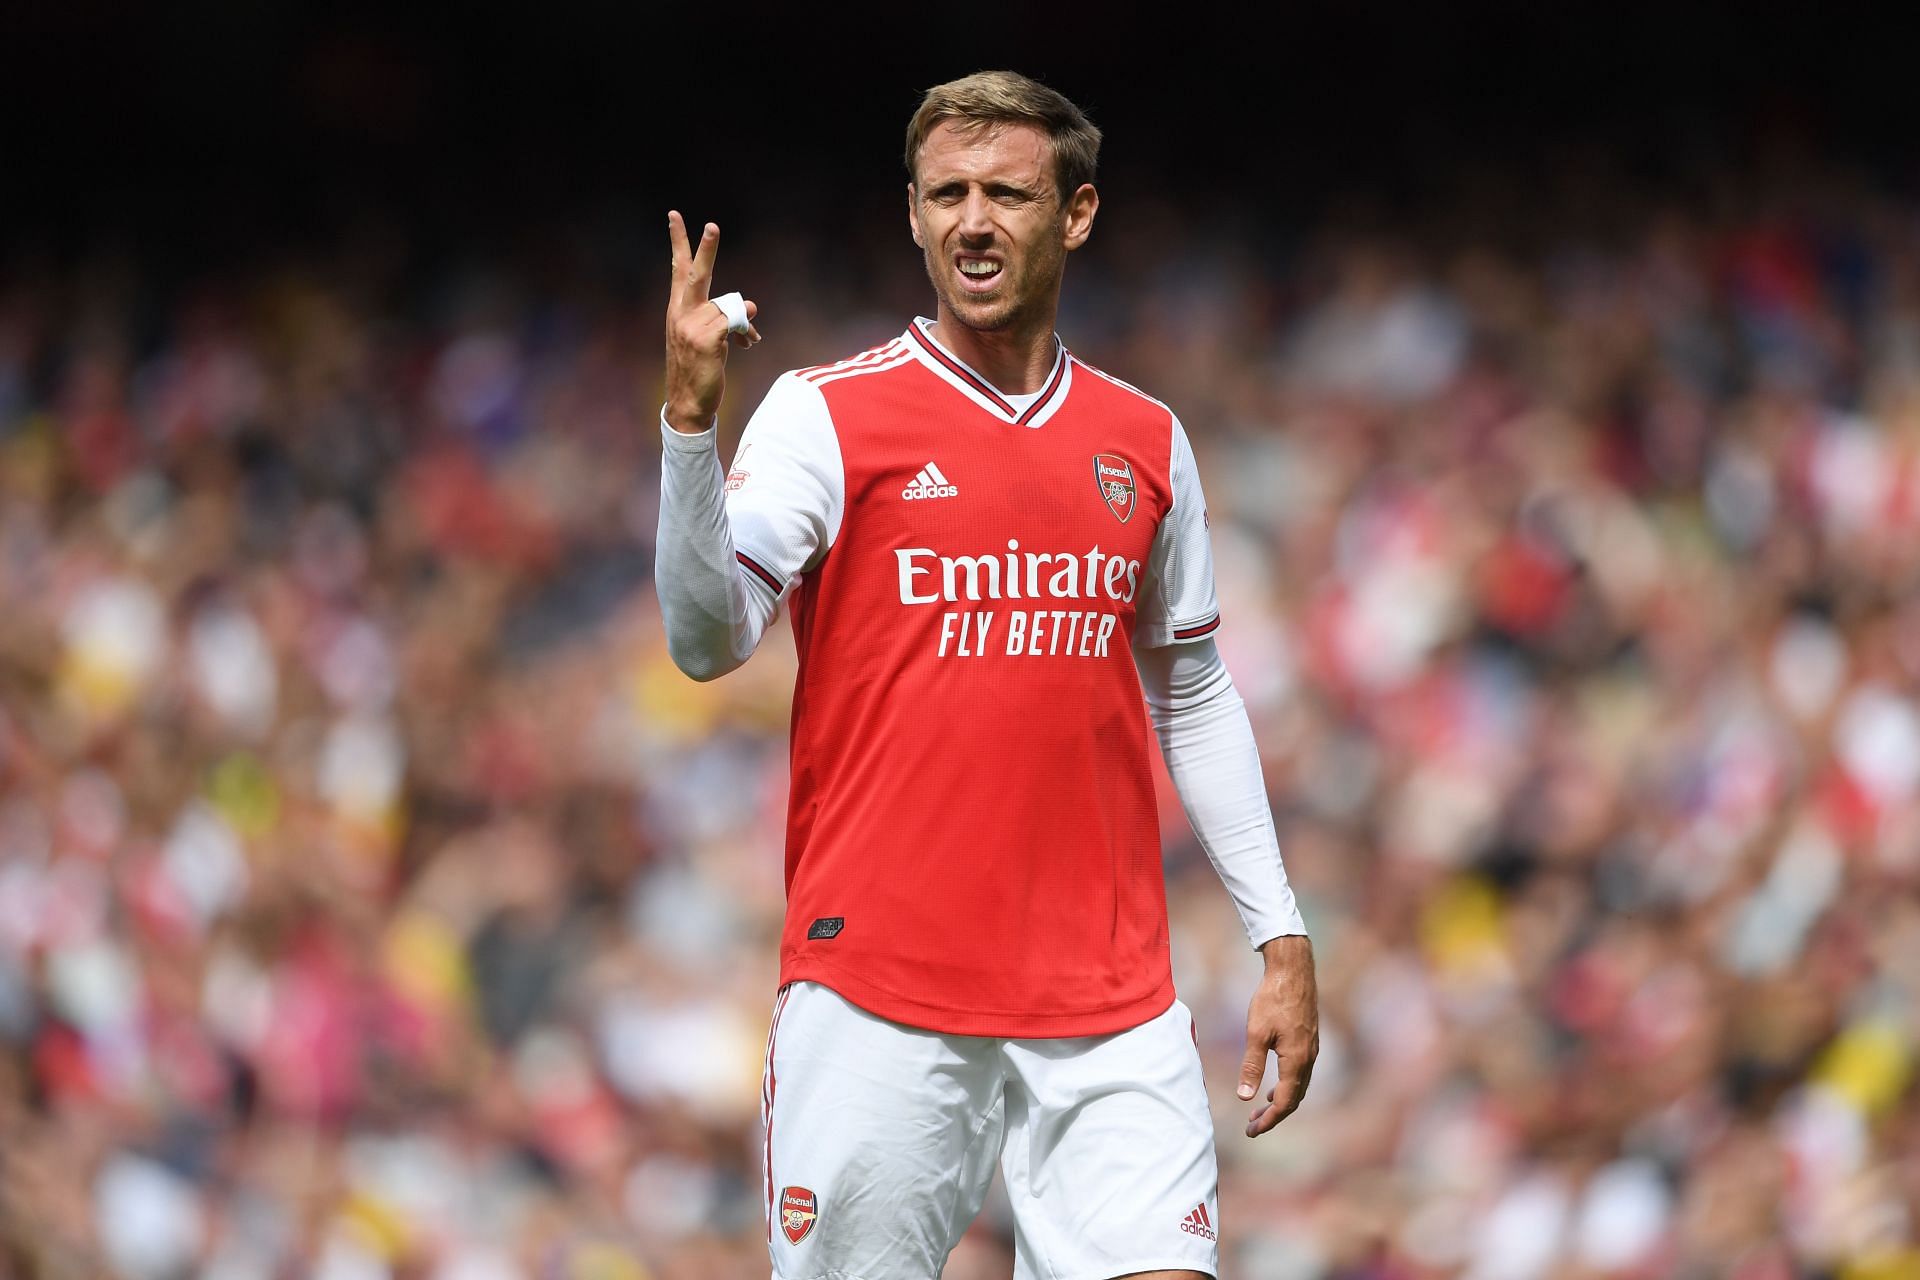 Monreal was a solid and ever-present figure in the rearguard.